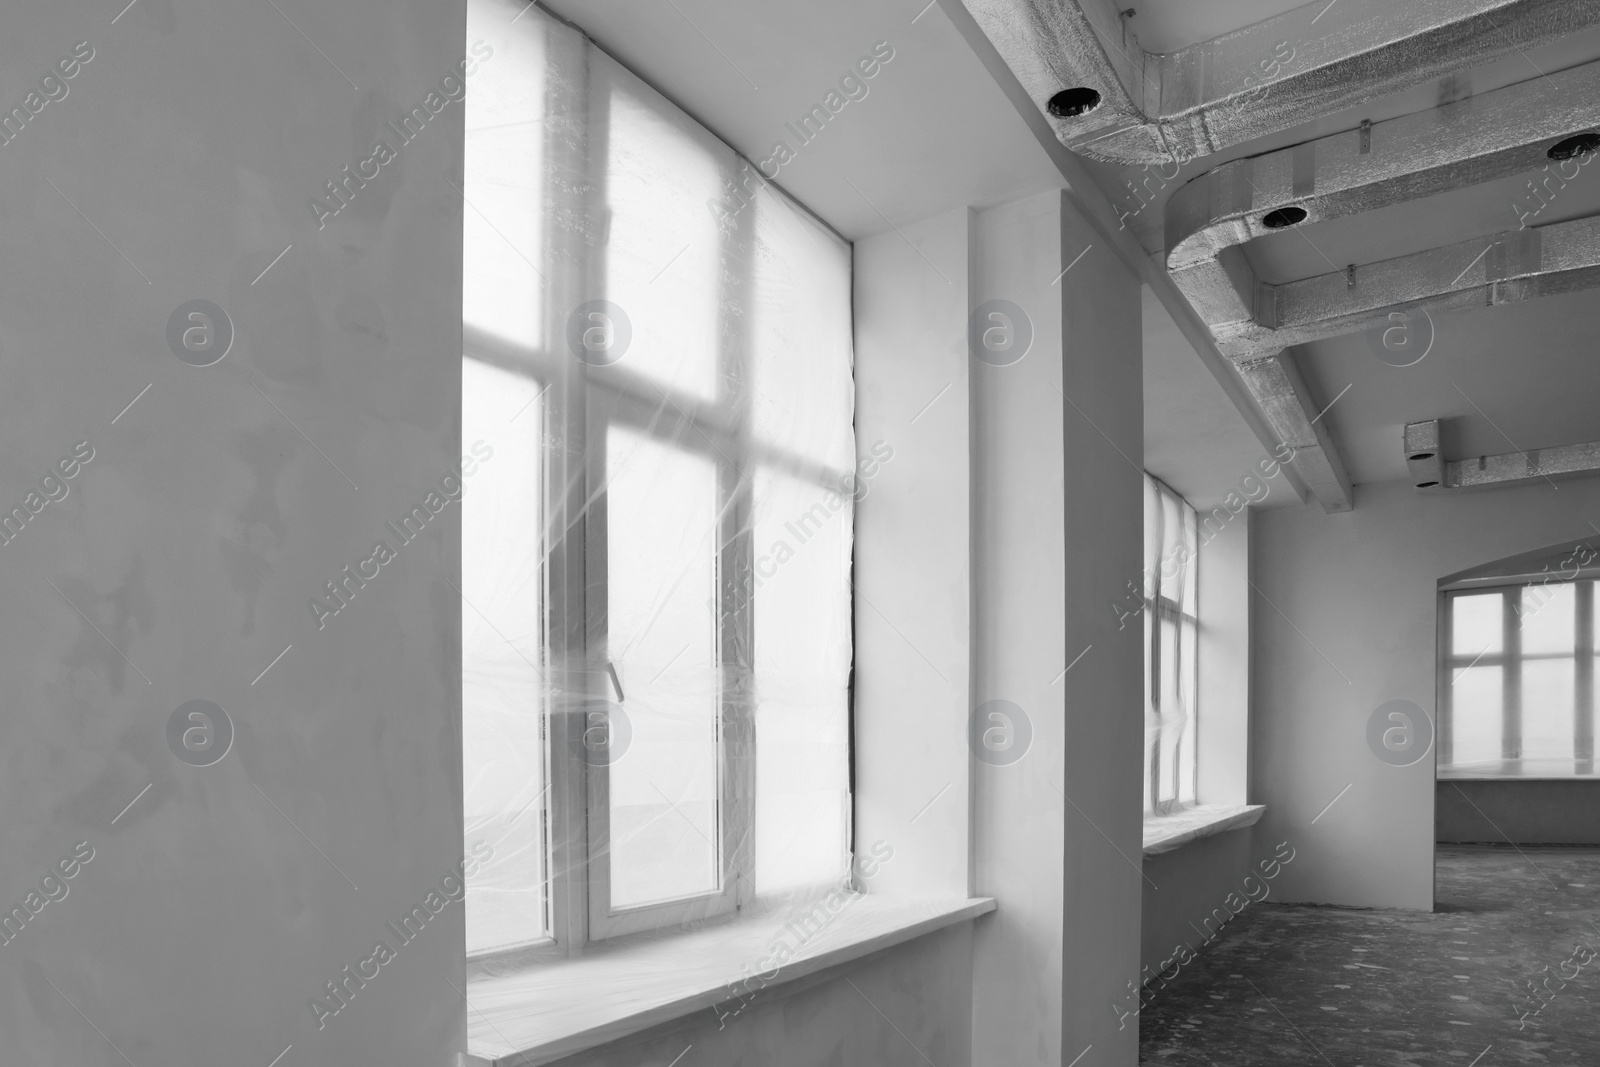 Photo of Windows covered with plastic film in spacious room